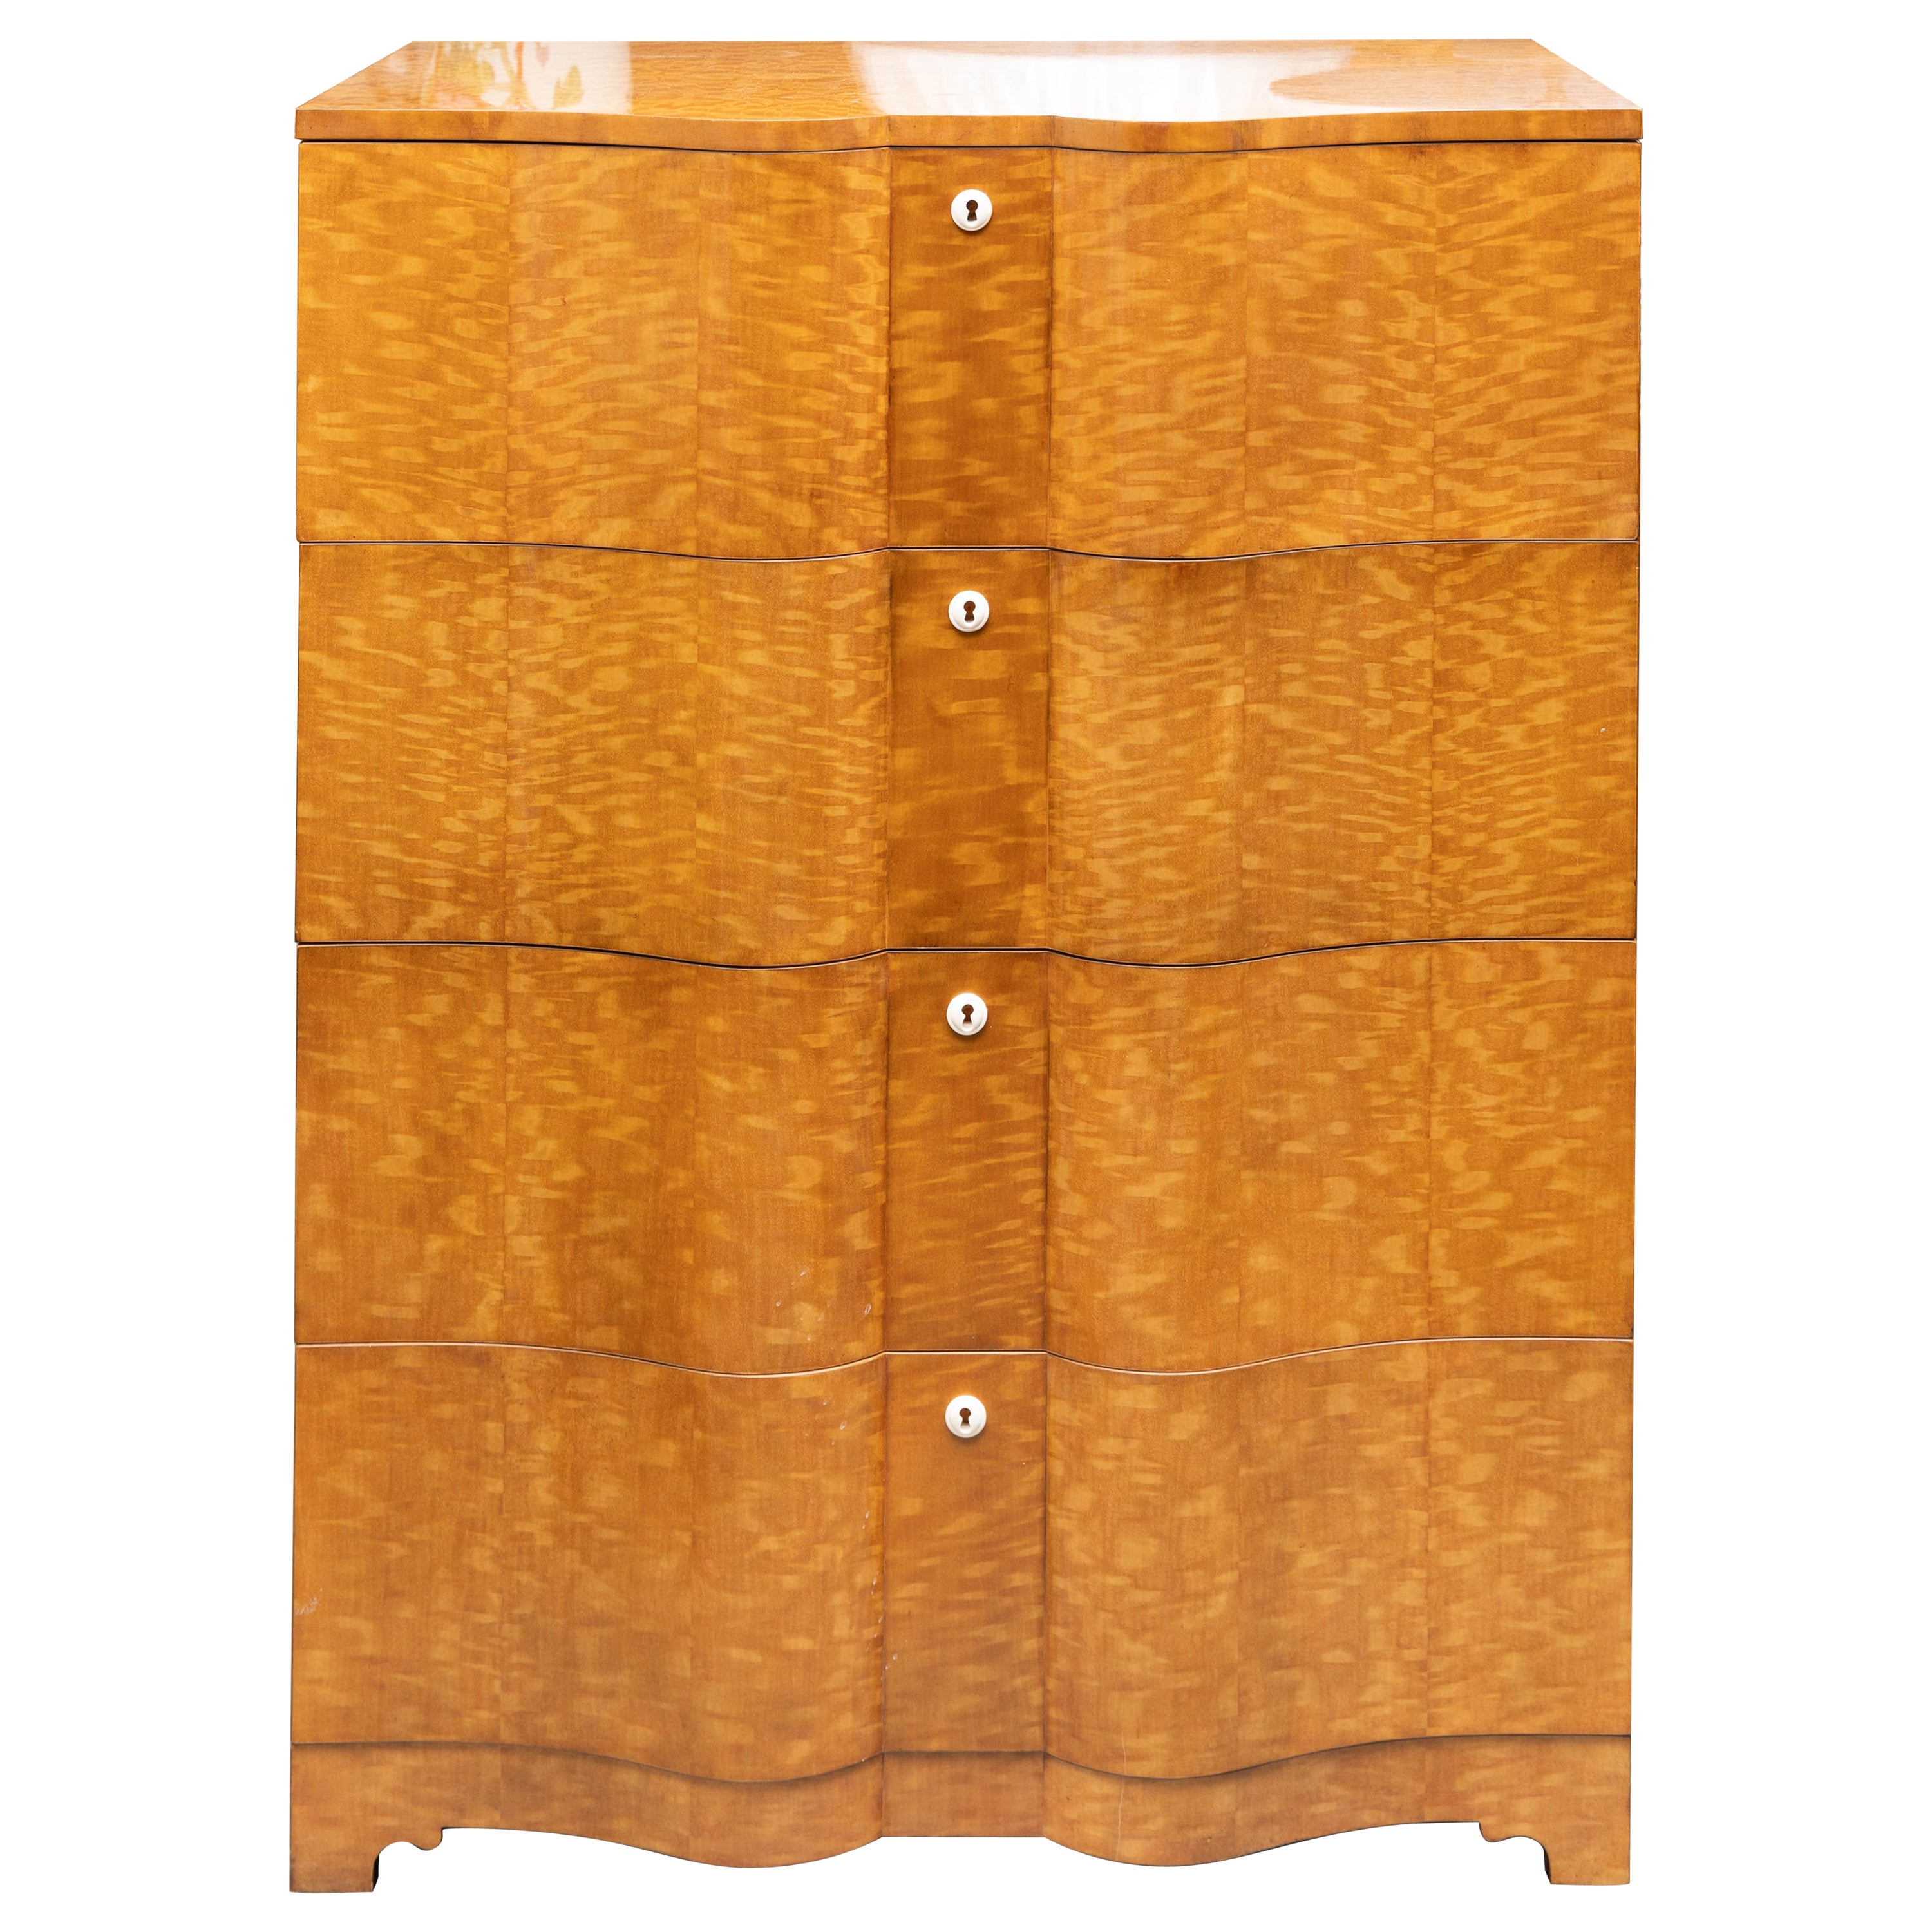 Keno Brothers Serpentine Chest of Drawers